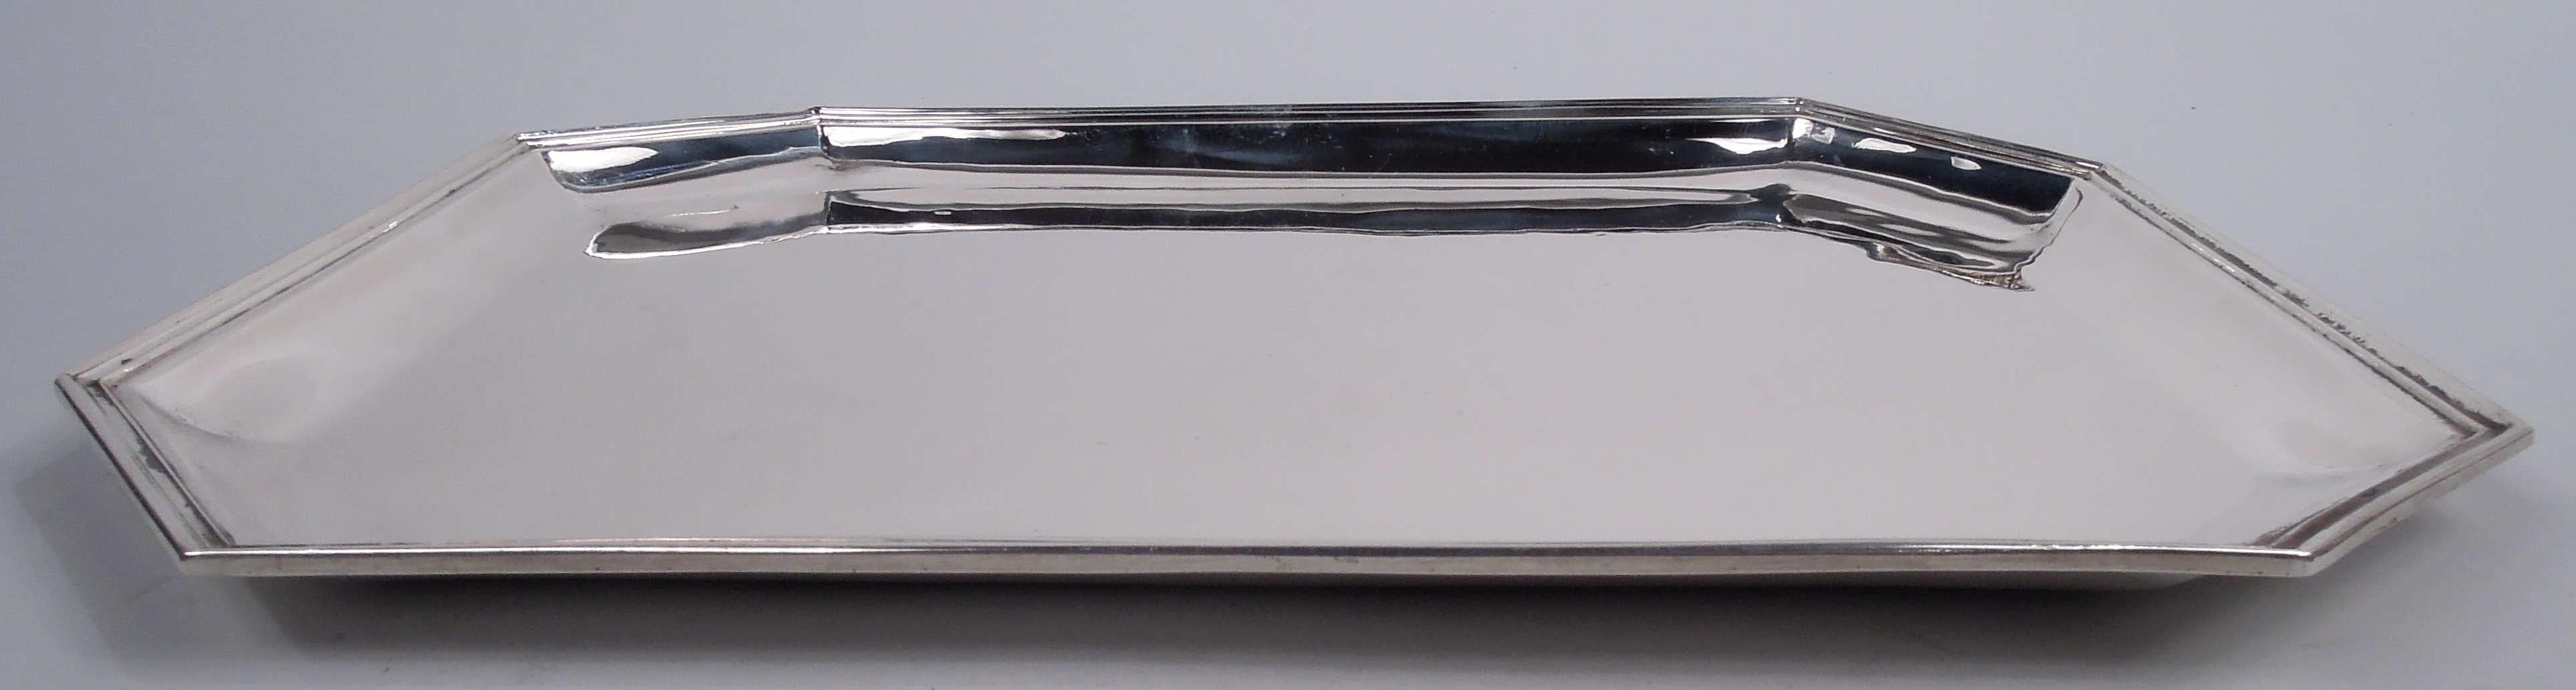 Chamfered Cartier American Art Deco Sterling Silver Tray   For Sale